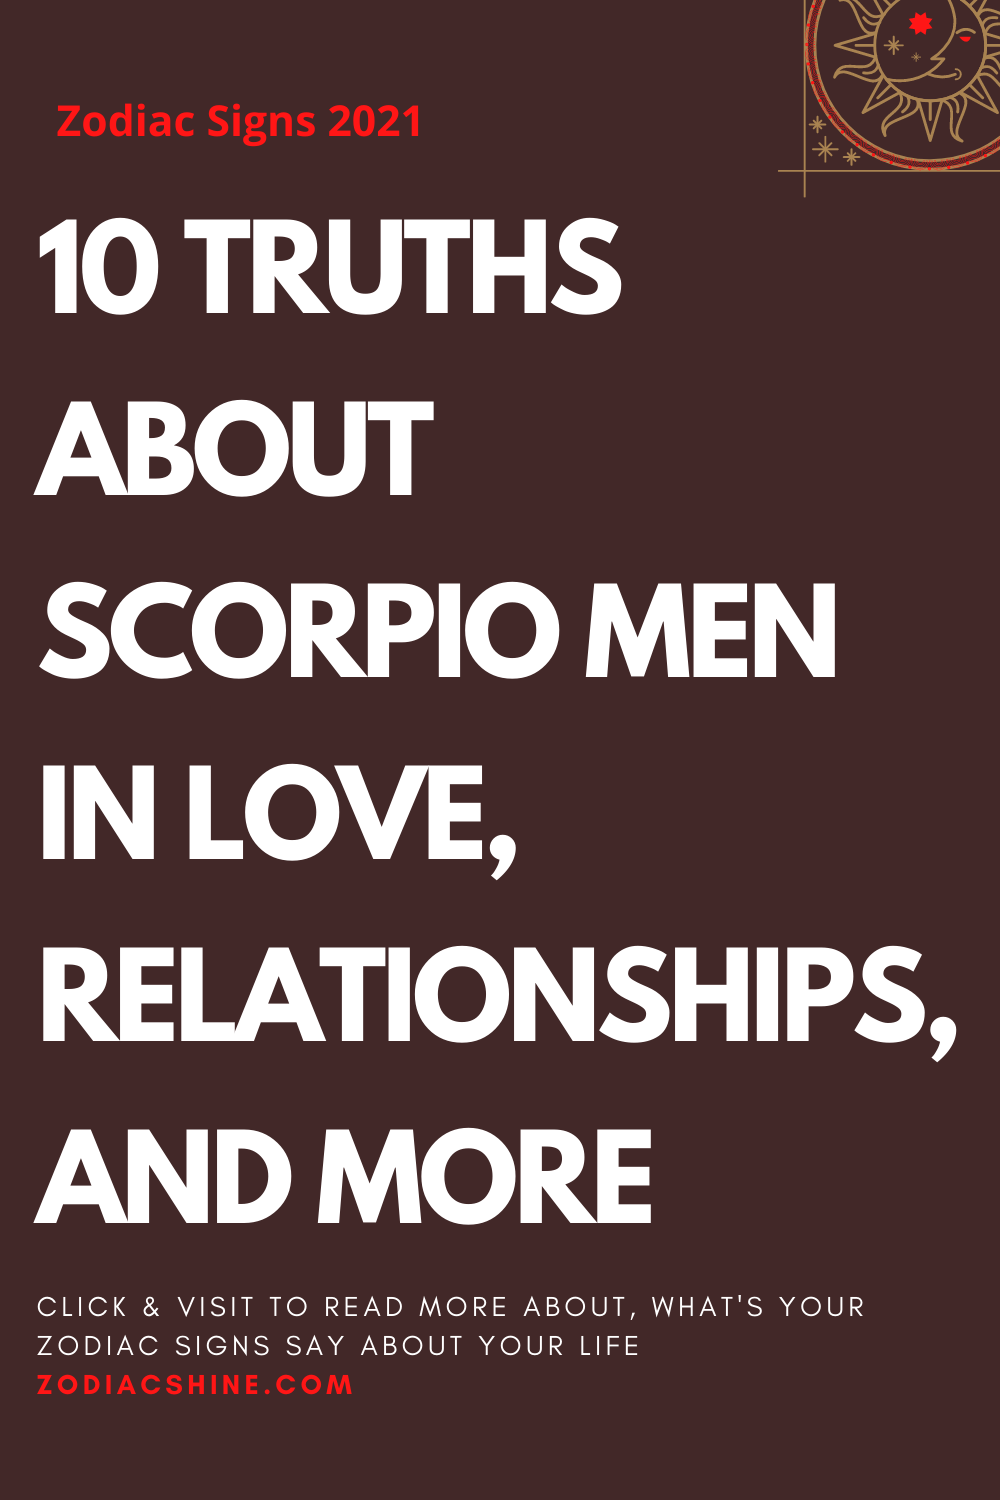 10 TRUTHS ABOUT SCORPIO MEN IN LOVE, RELATIONSHIPS, AND MORE